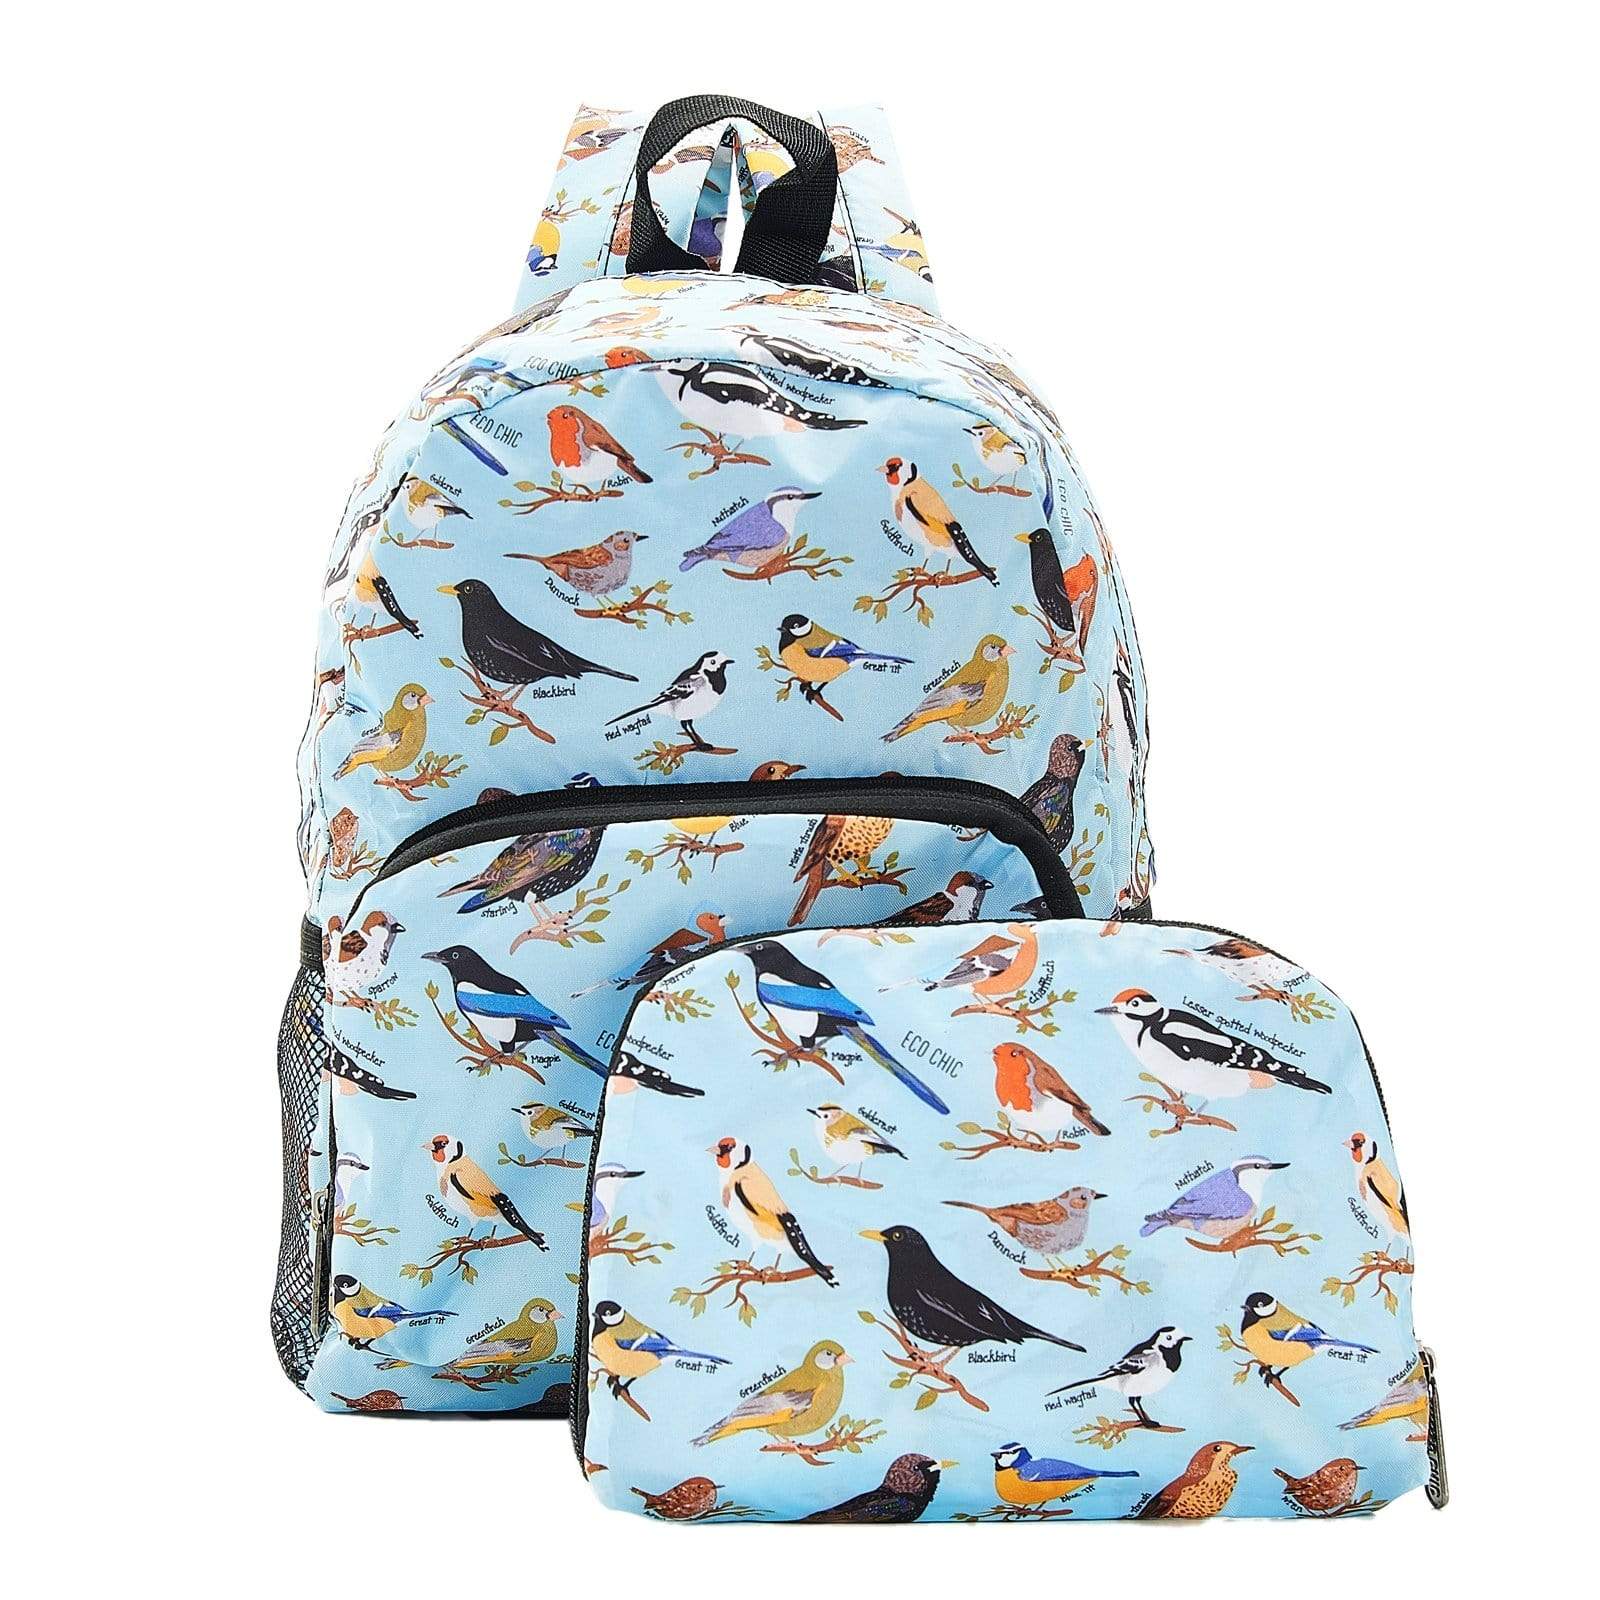 Eco Chic Blue Eco Chic Lightweight Foldable Mini Backpack Wild Birds